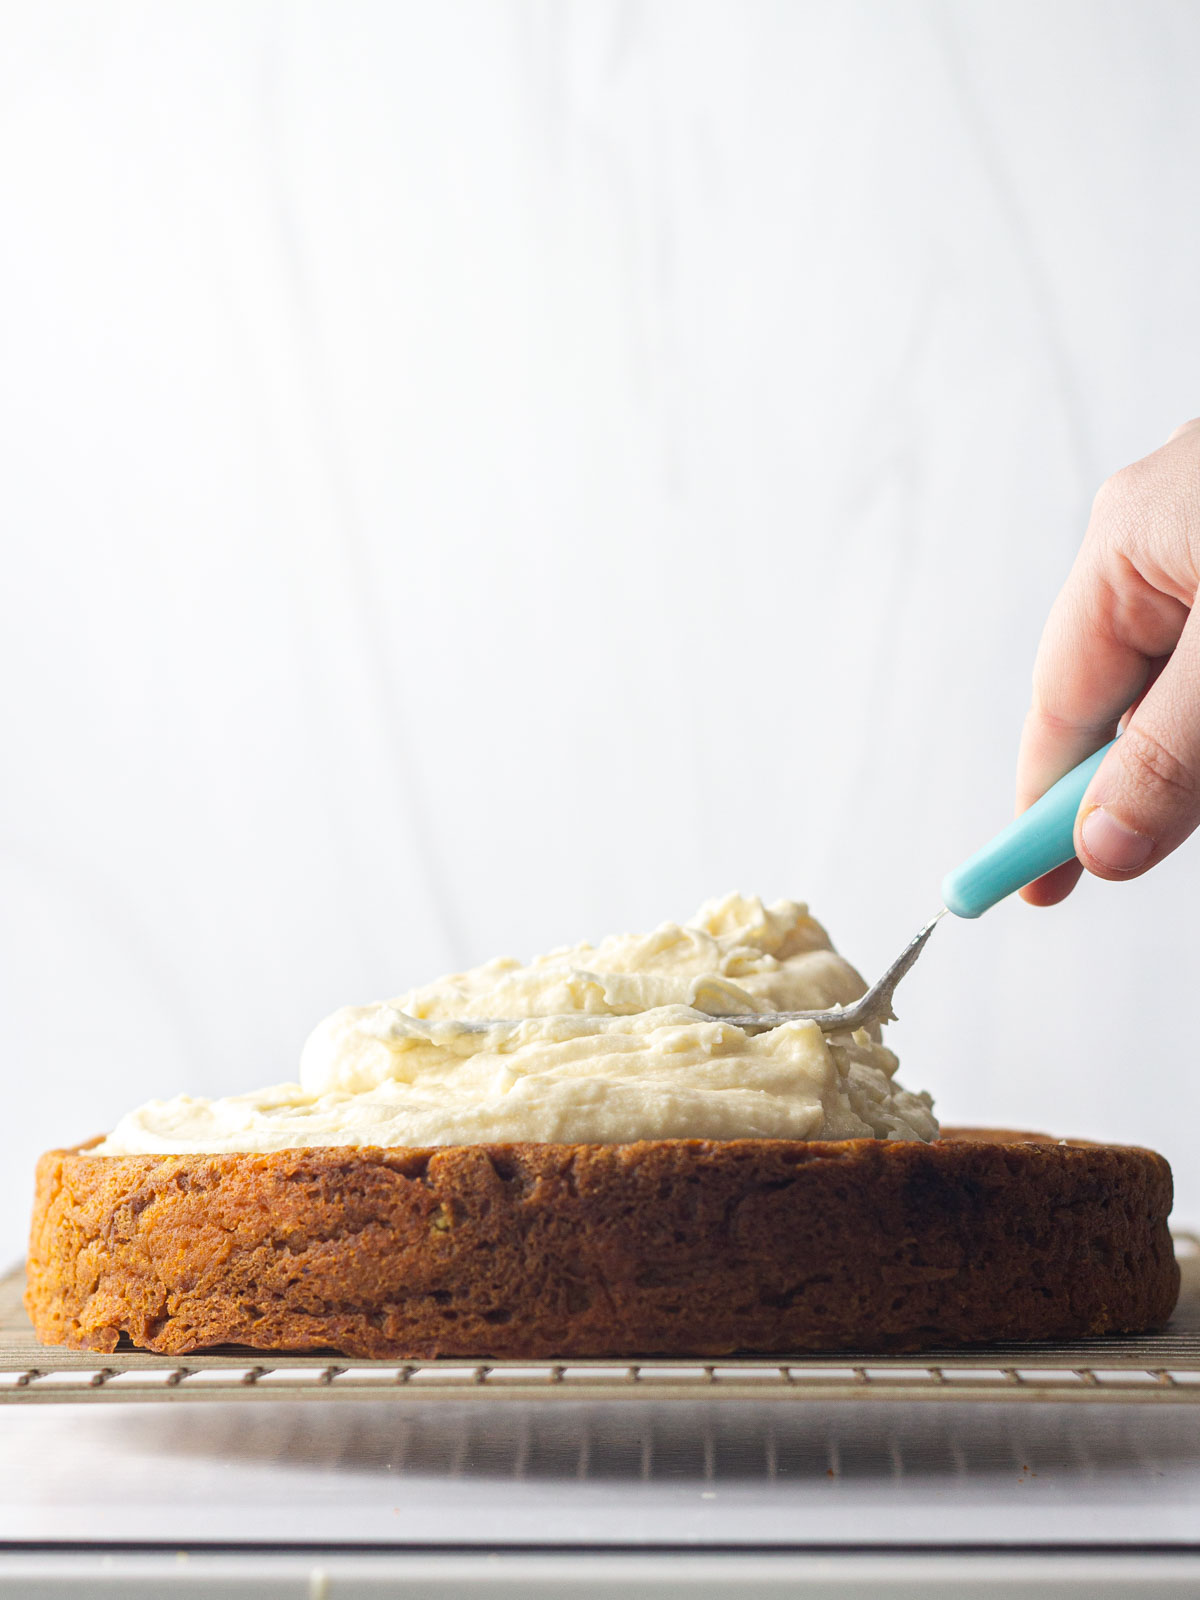 A hand spreading marshmallow frosting onto a sweet potato cake on a gold wire rack.